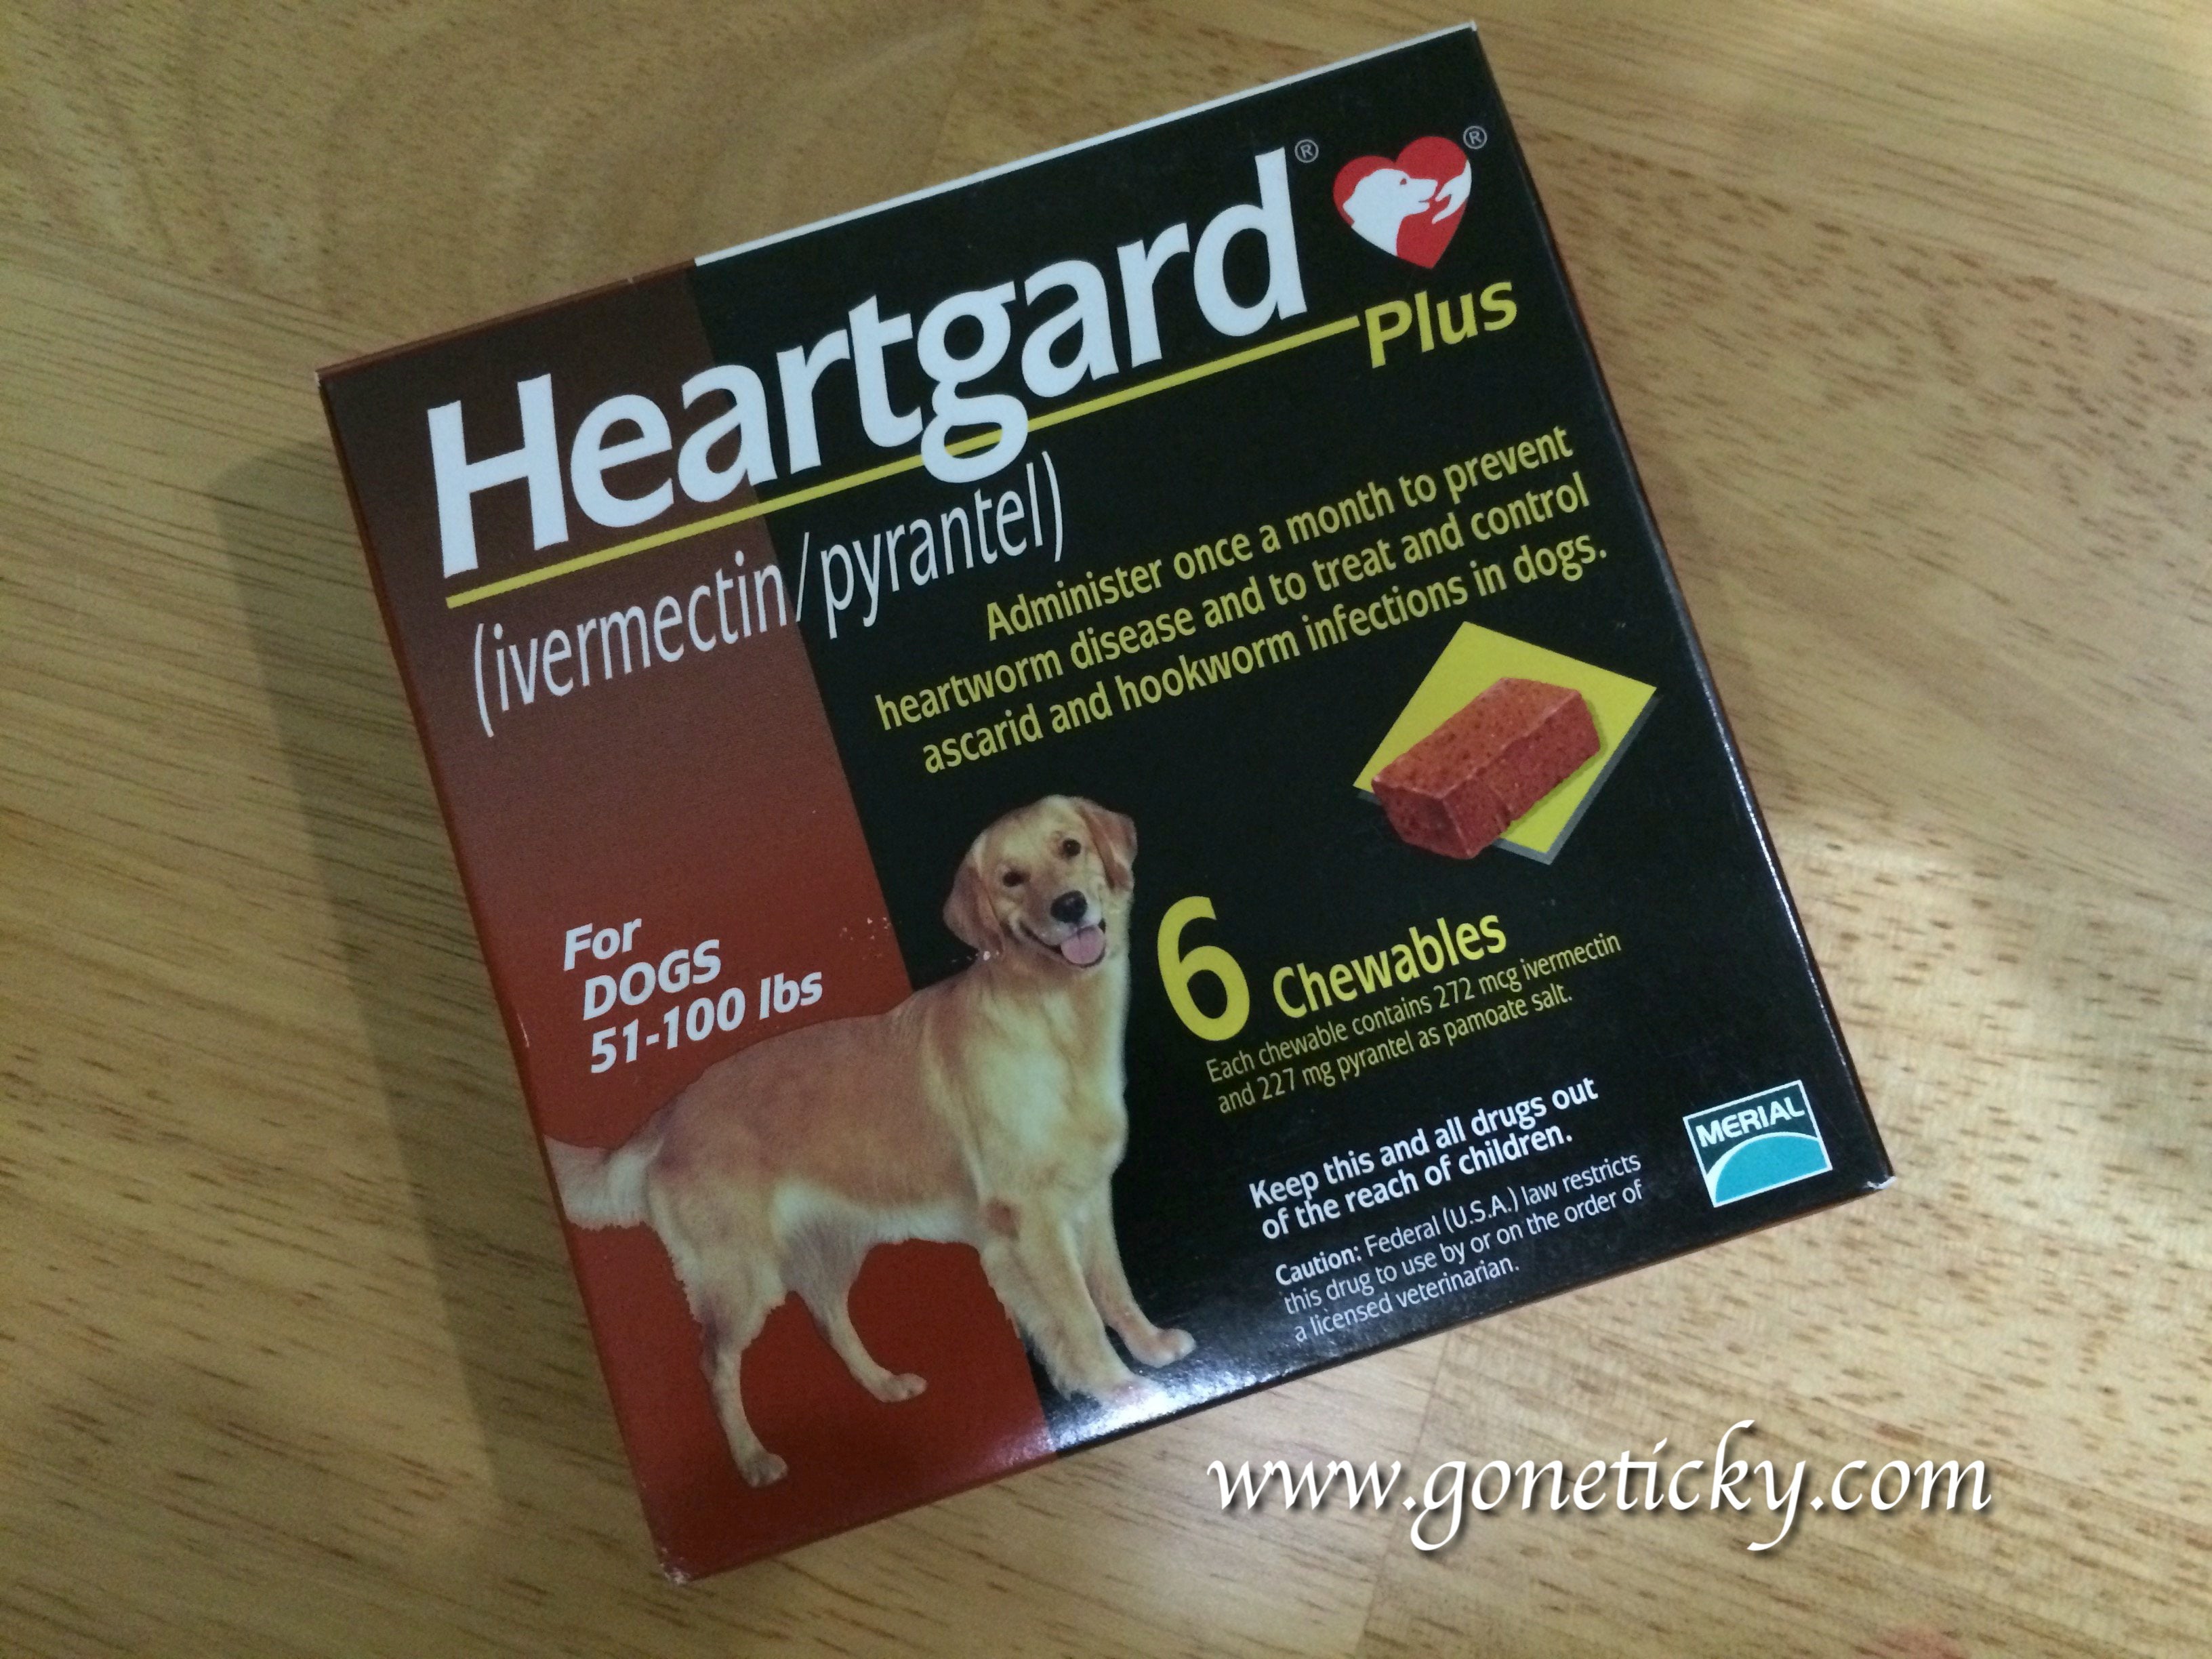 6 Chewable Beef Flavoured Heartgard Plus for Large Dogs Heartworm 51-100lbs (272mcg)